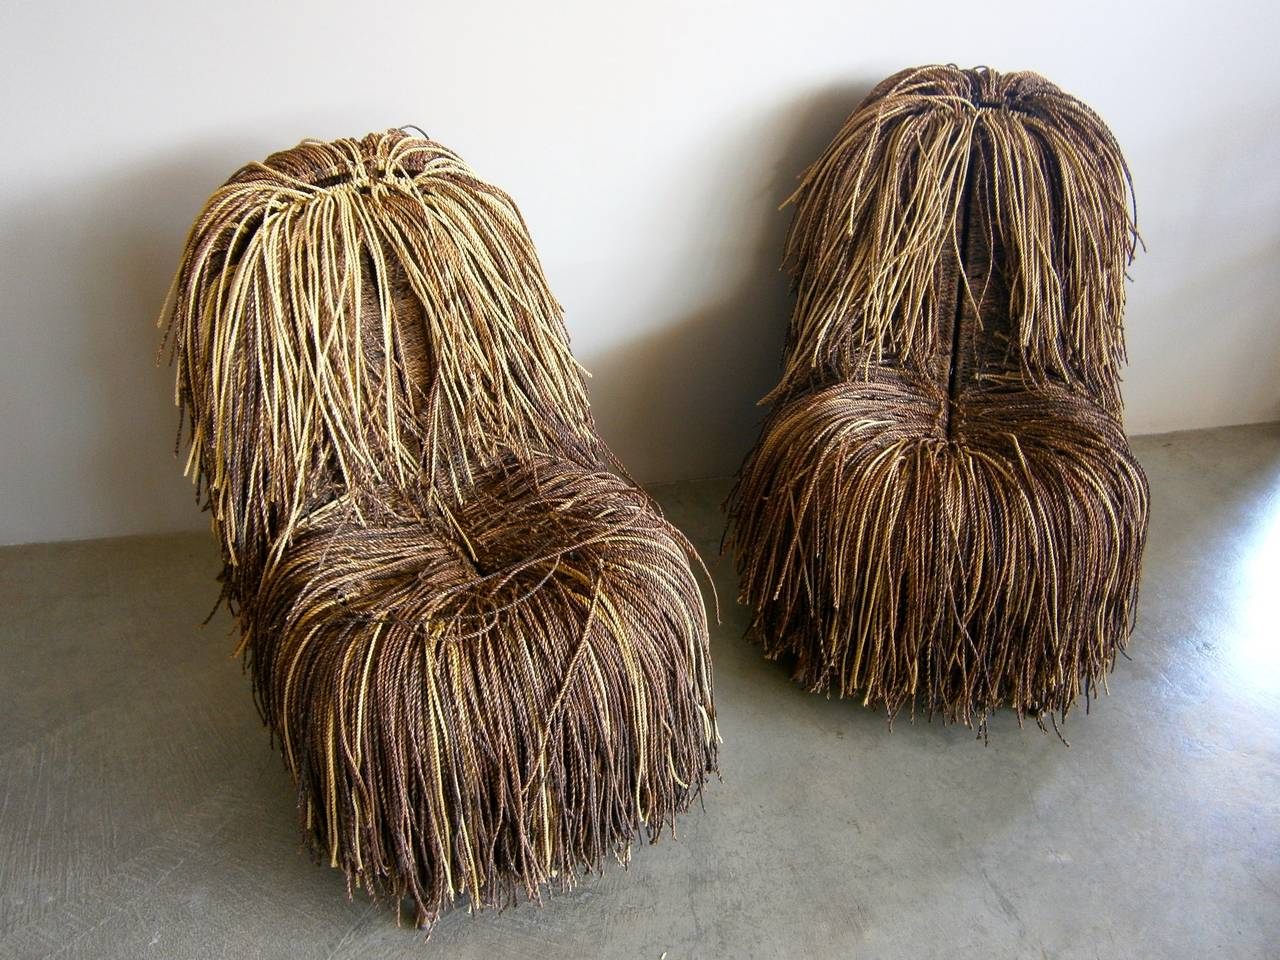 A whimsical and wonderful pair of shaggy cord/rope chairs reminiscent of the brilliant work of the Campana Brothers. Variegated tones of stranded cord are individually woven onto a custom made metal frame built to receive this deep and random